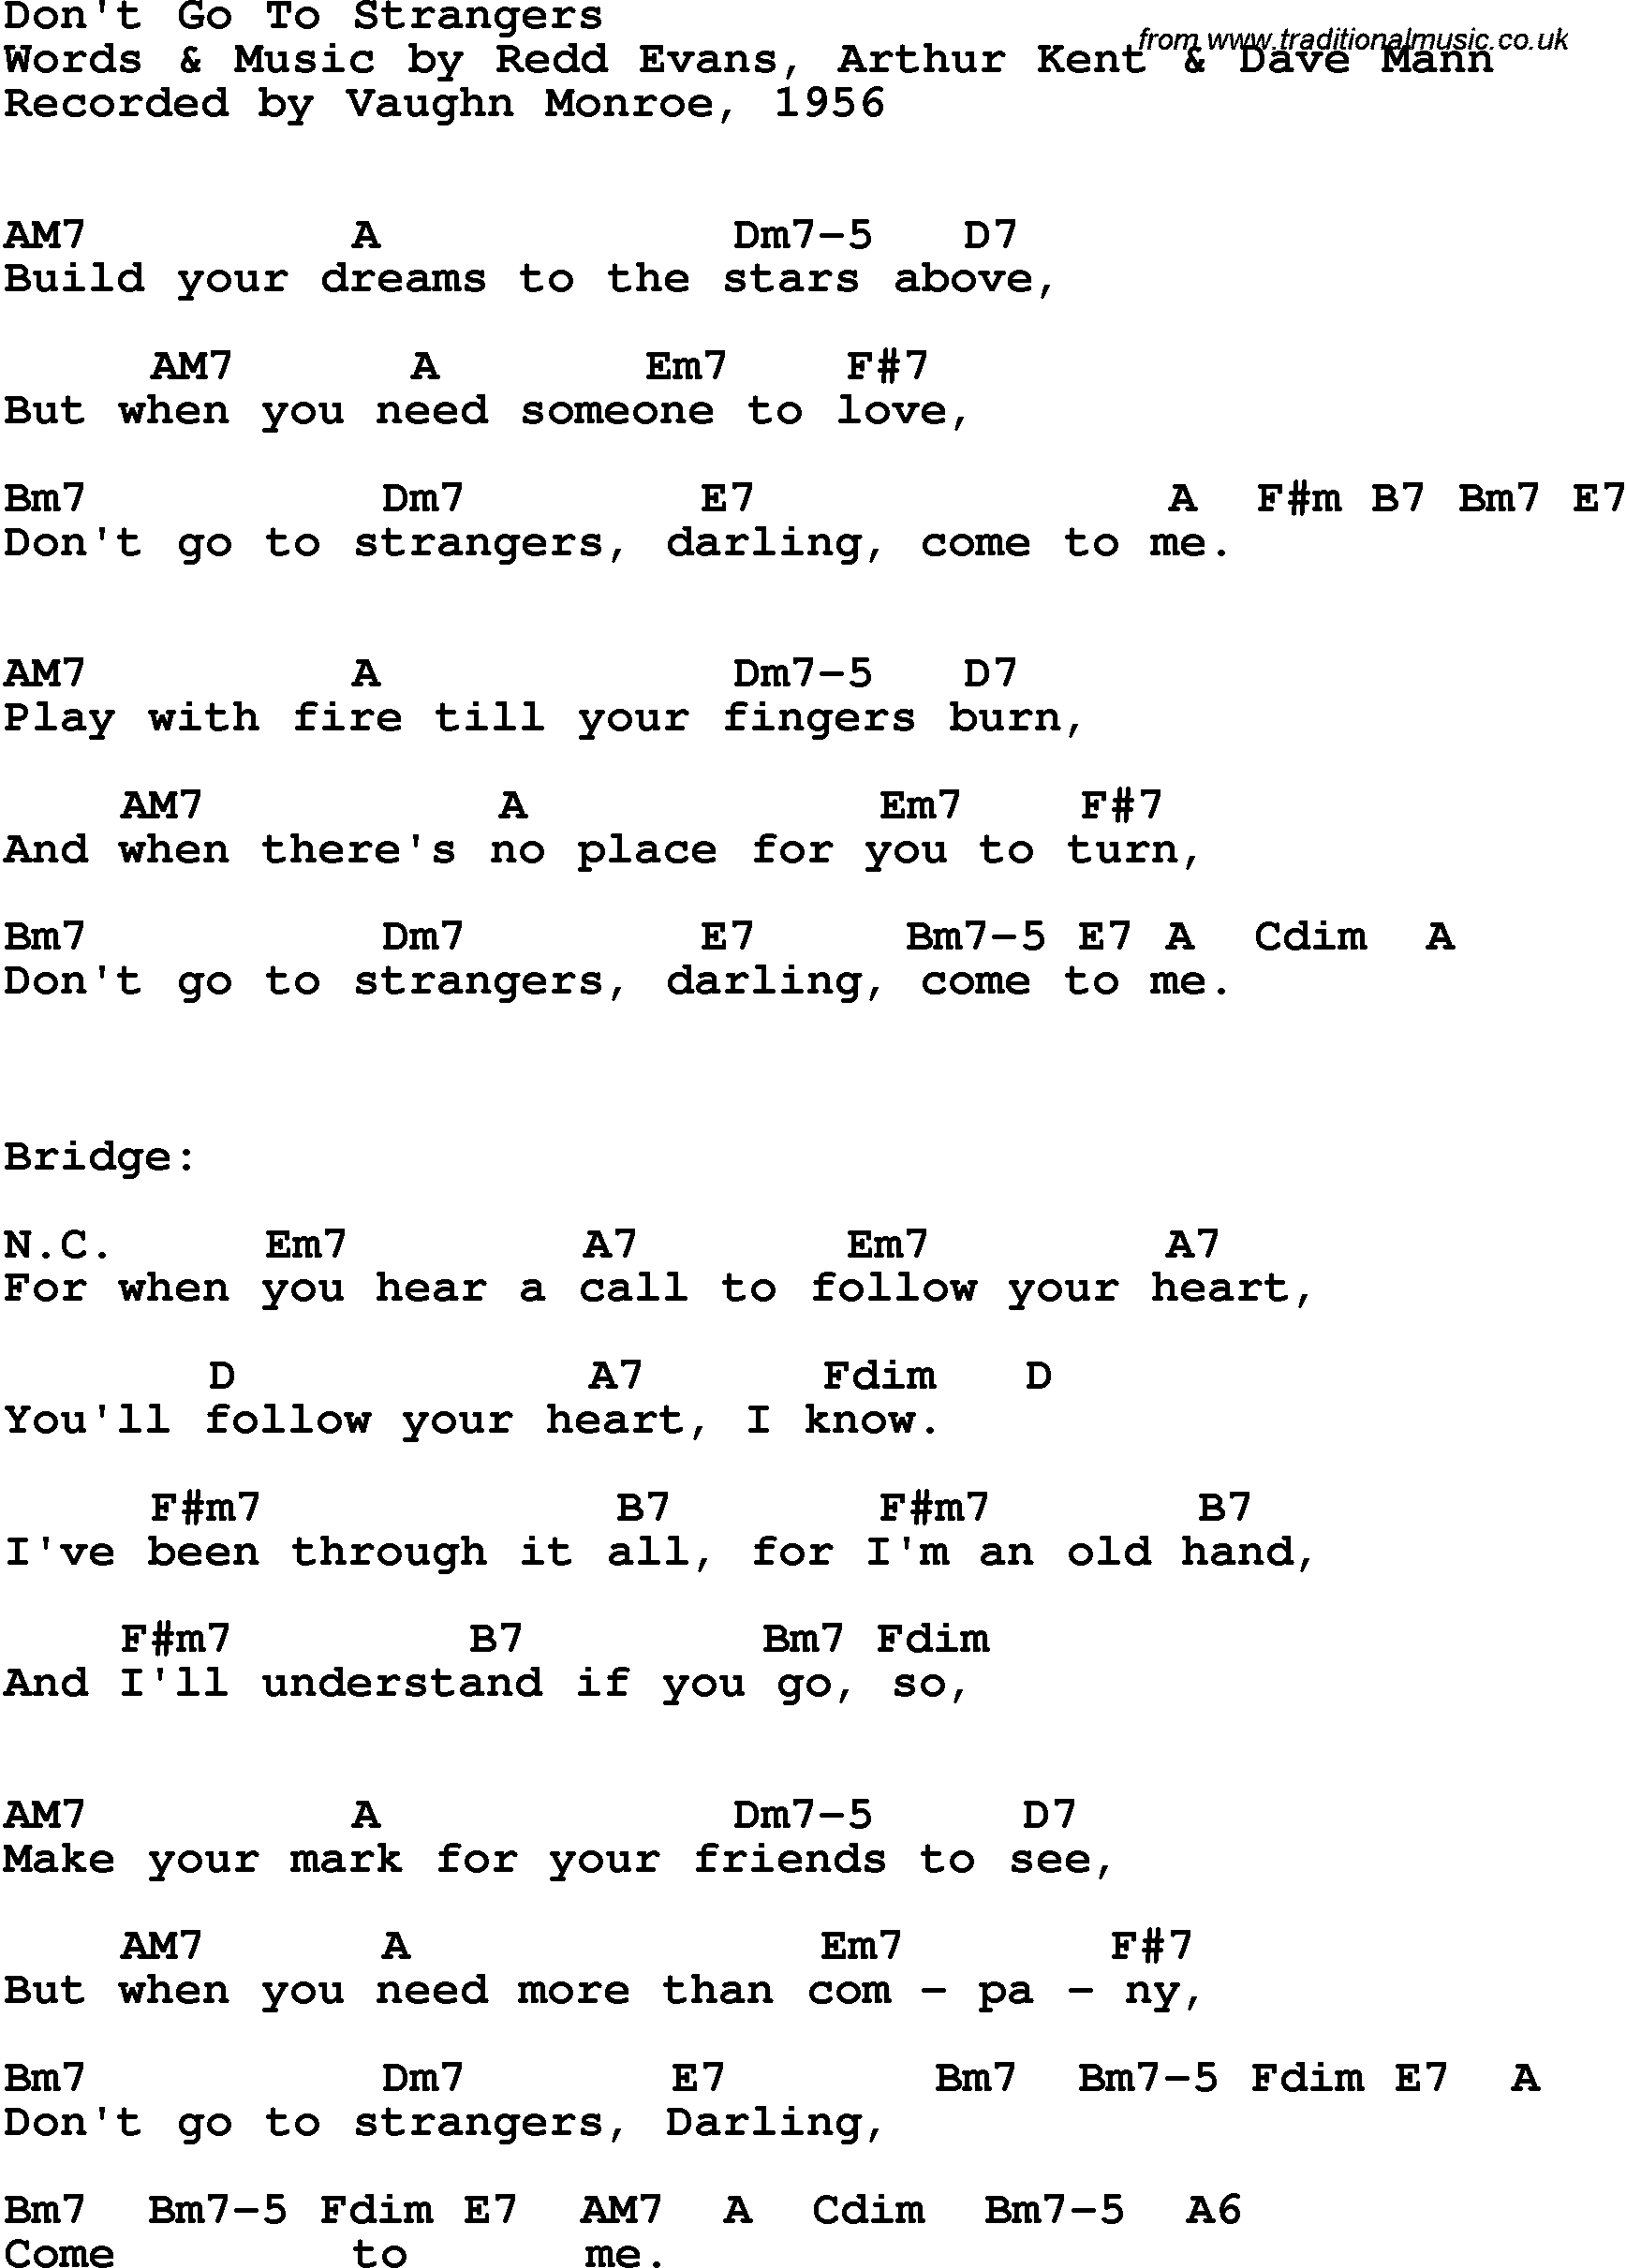 Song Lyrics with guitar chords for Don't Go To Strangers - Vaughn Monroe, 1956